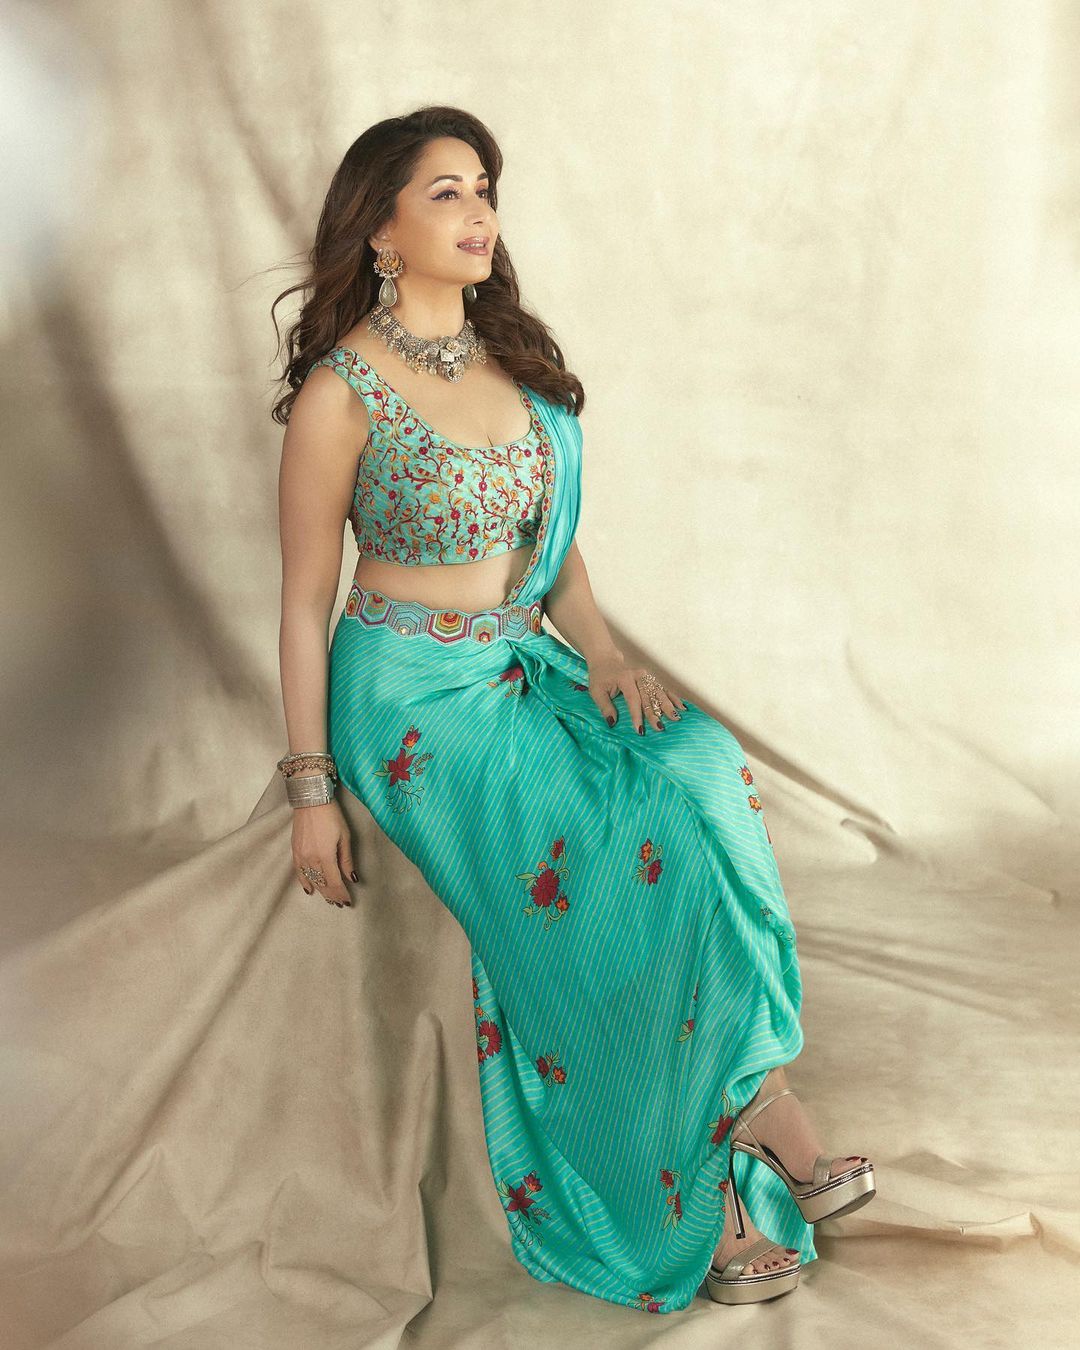 Madhuri Dixit Sex Picture Videos - Madhuri Dixit Shows How You Can Never Go Wrong In A Saree, See Her Alluring  Saree Moments